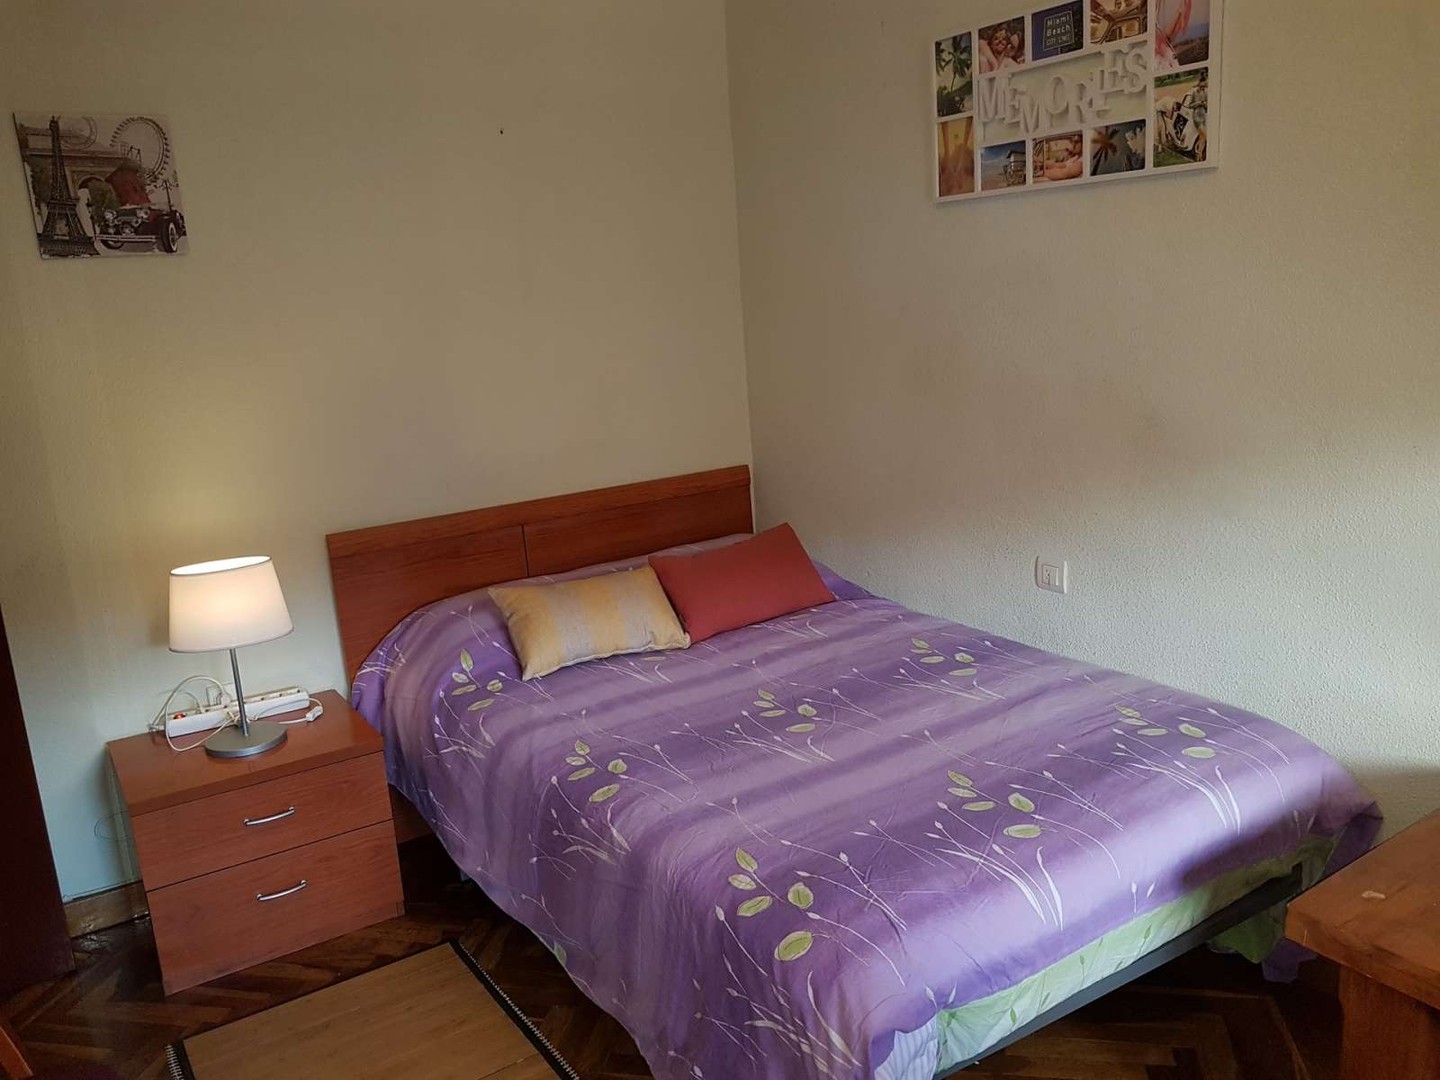 Room for rent with double bed salamanca